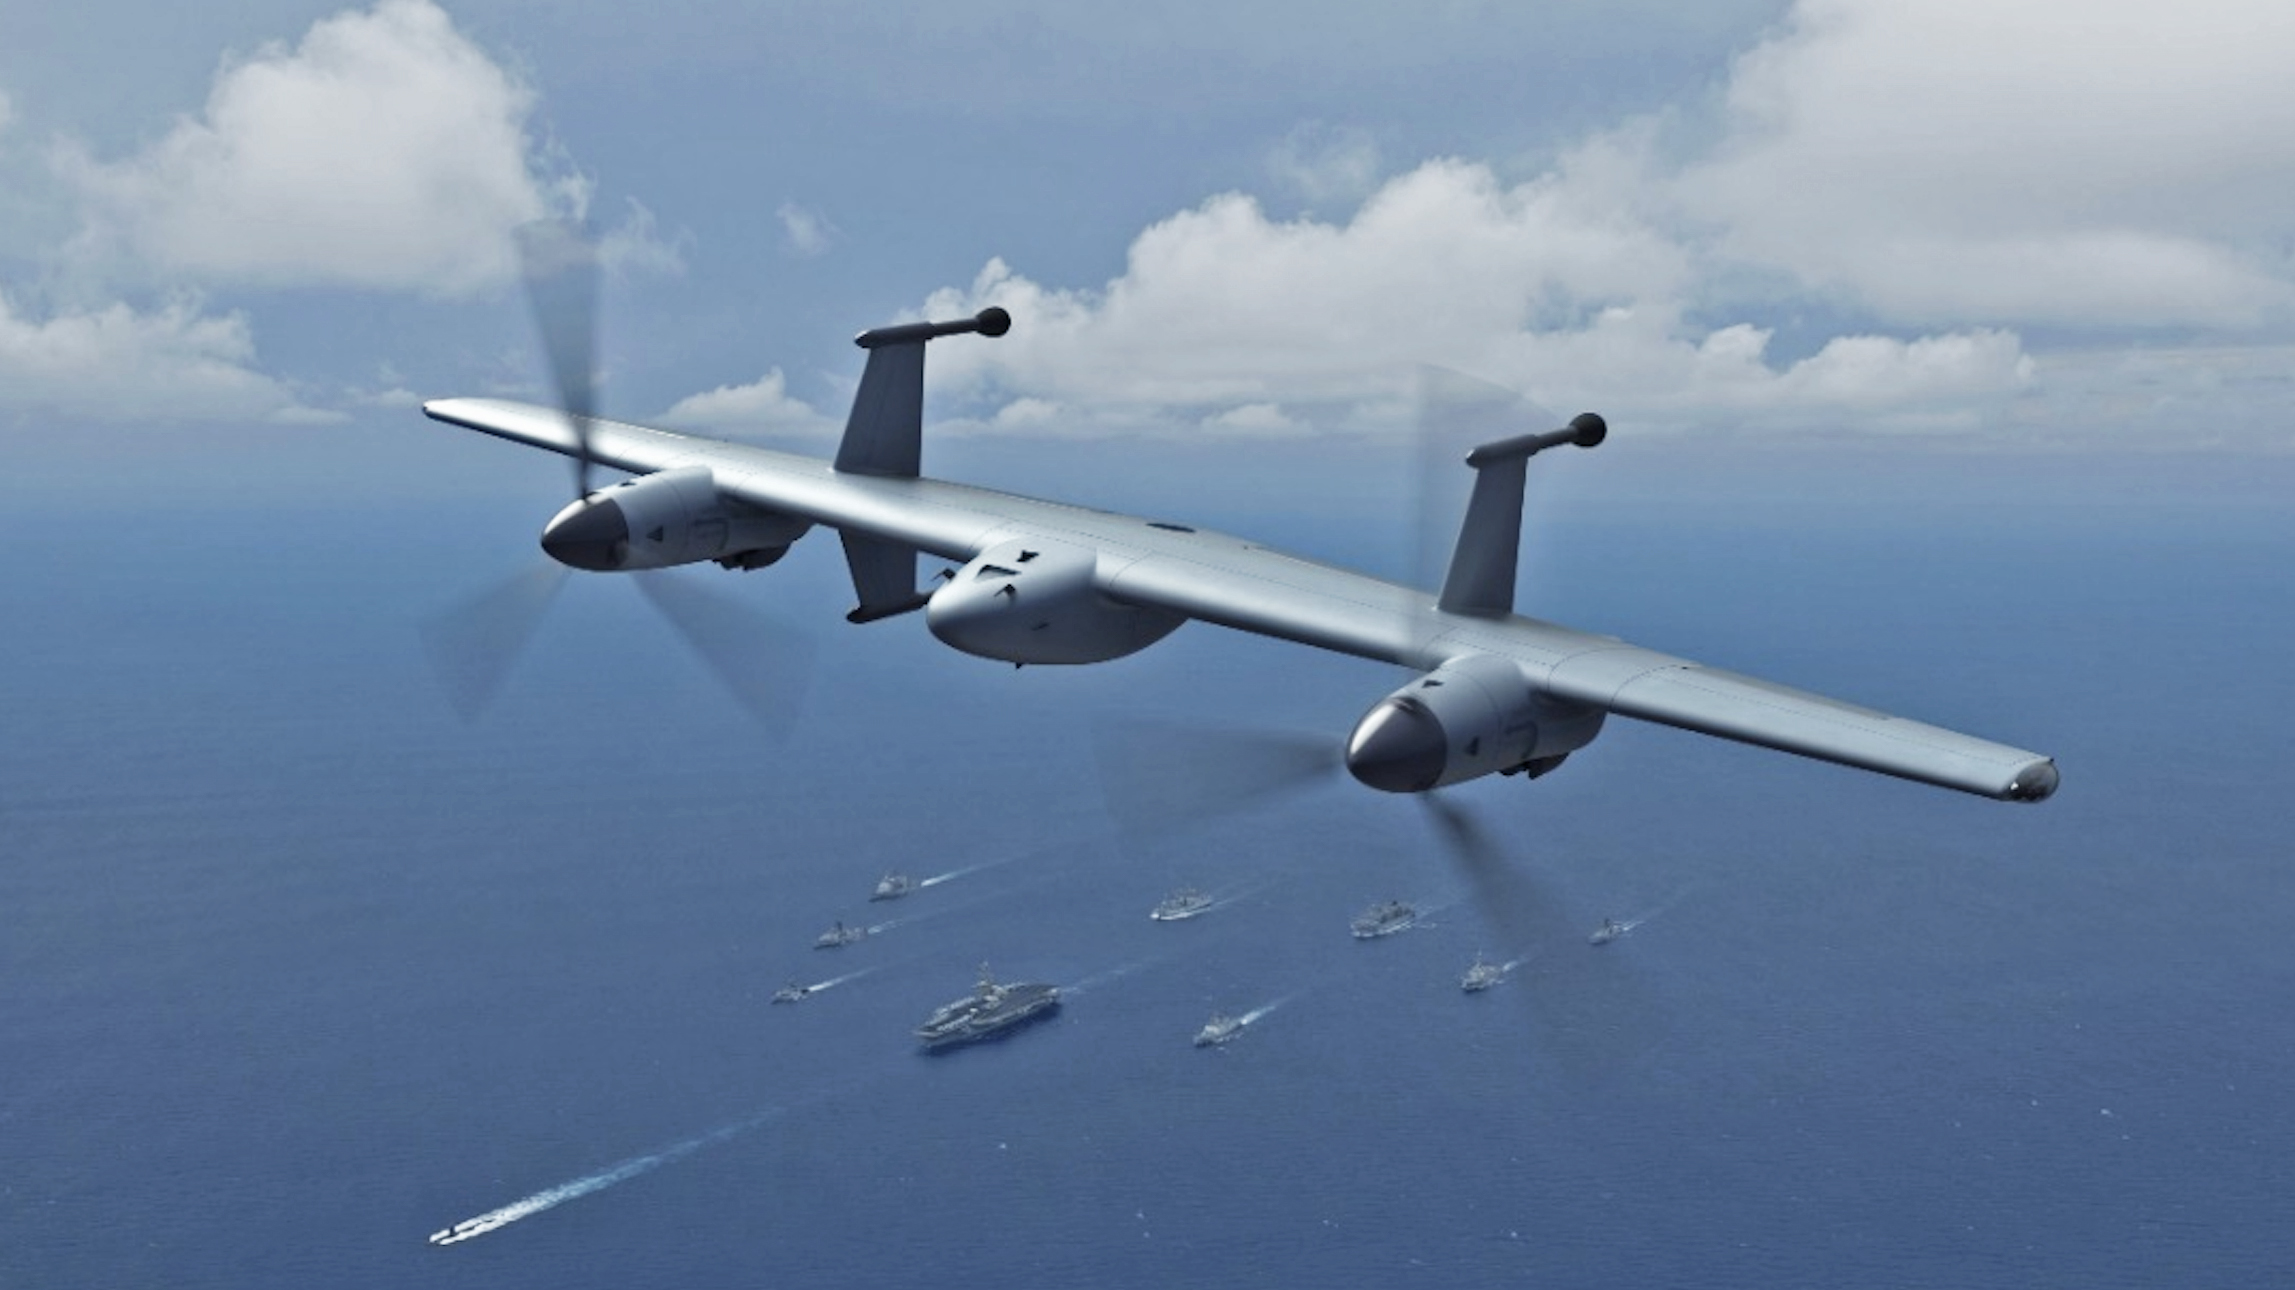 The Defense Advanced Research Projects Agency (DARPA) has chosen designs from Northrop Grumman and Sikorsky for the next phase of its AdvaNced airCraft Infrastructure-Less Launch And RecoverY (ANCILLARY) autonomous vertical takeoff and landing (VTOL) X-plane demonstration program. The effort aims to develop and test in flight an X-plane that will offer long endurance and the ability to launch and recover from ship flight decks and small austere land locations in adverse weather without additional infrastructure equipment. It’s part of an increasing focus on expeditionary deployments of the kind that will be required in a future conflict in the Pacific.